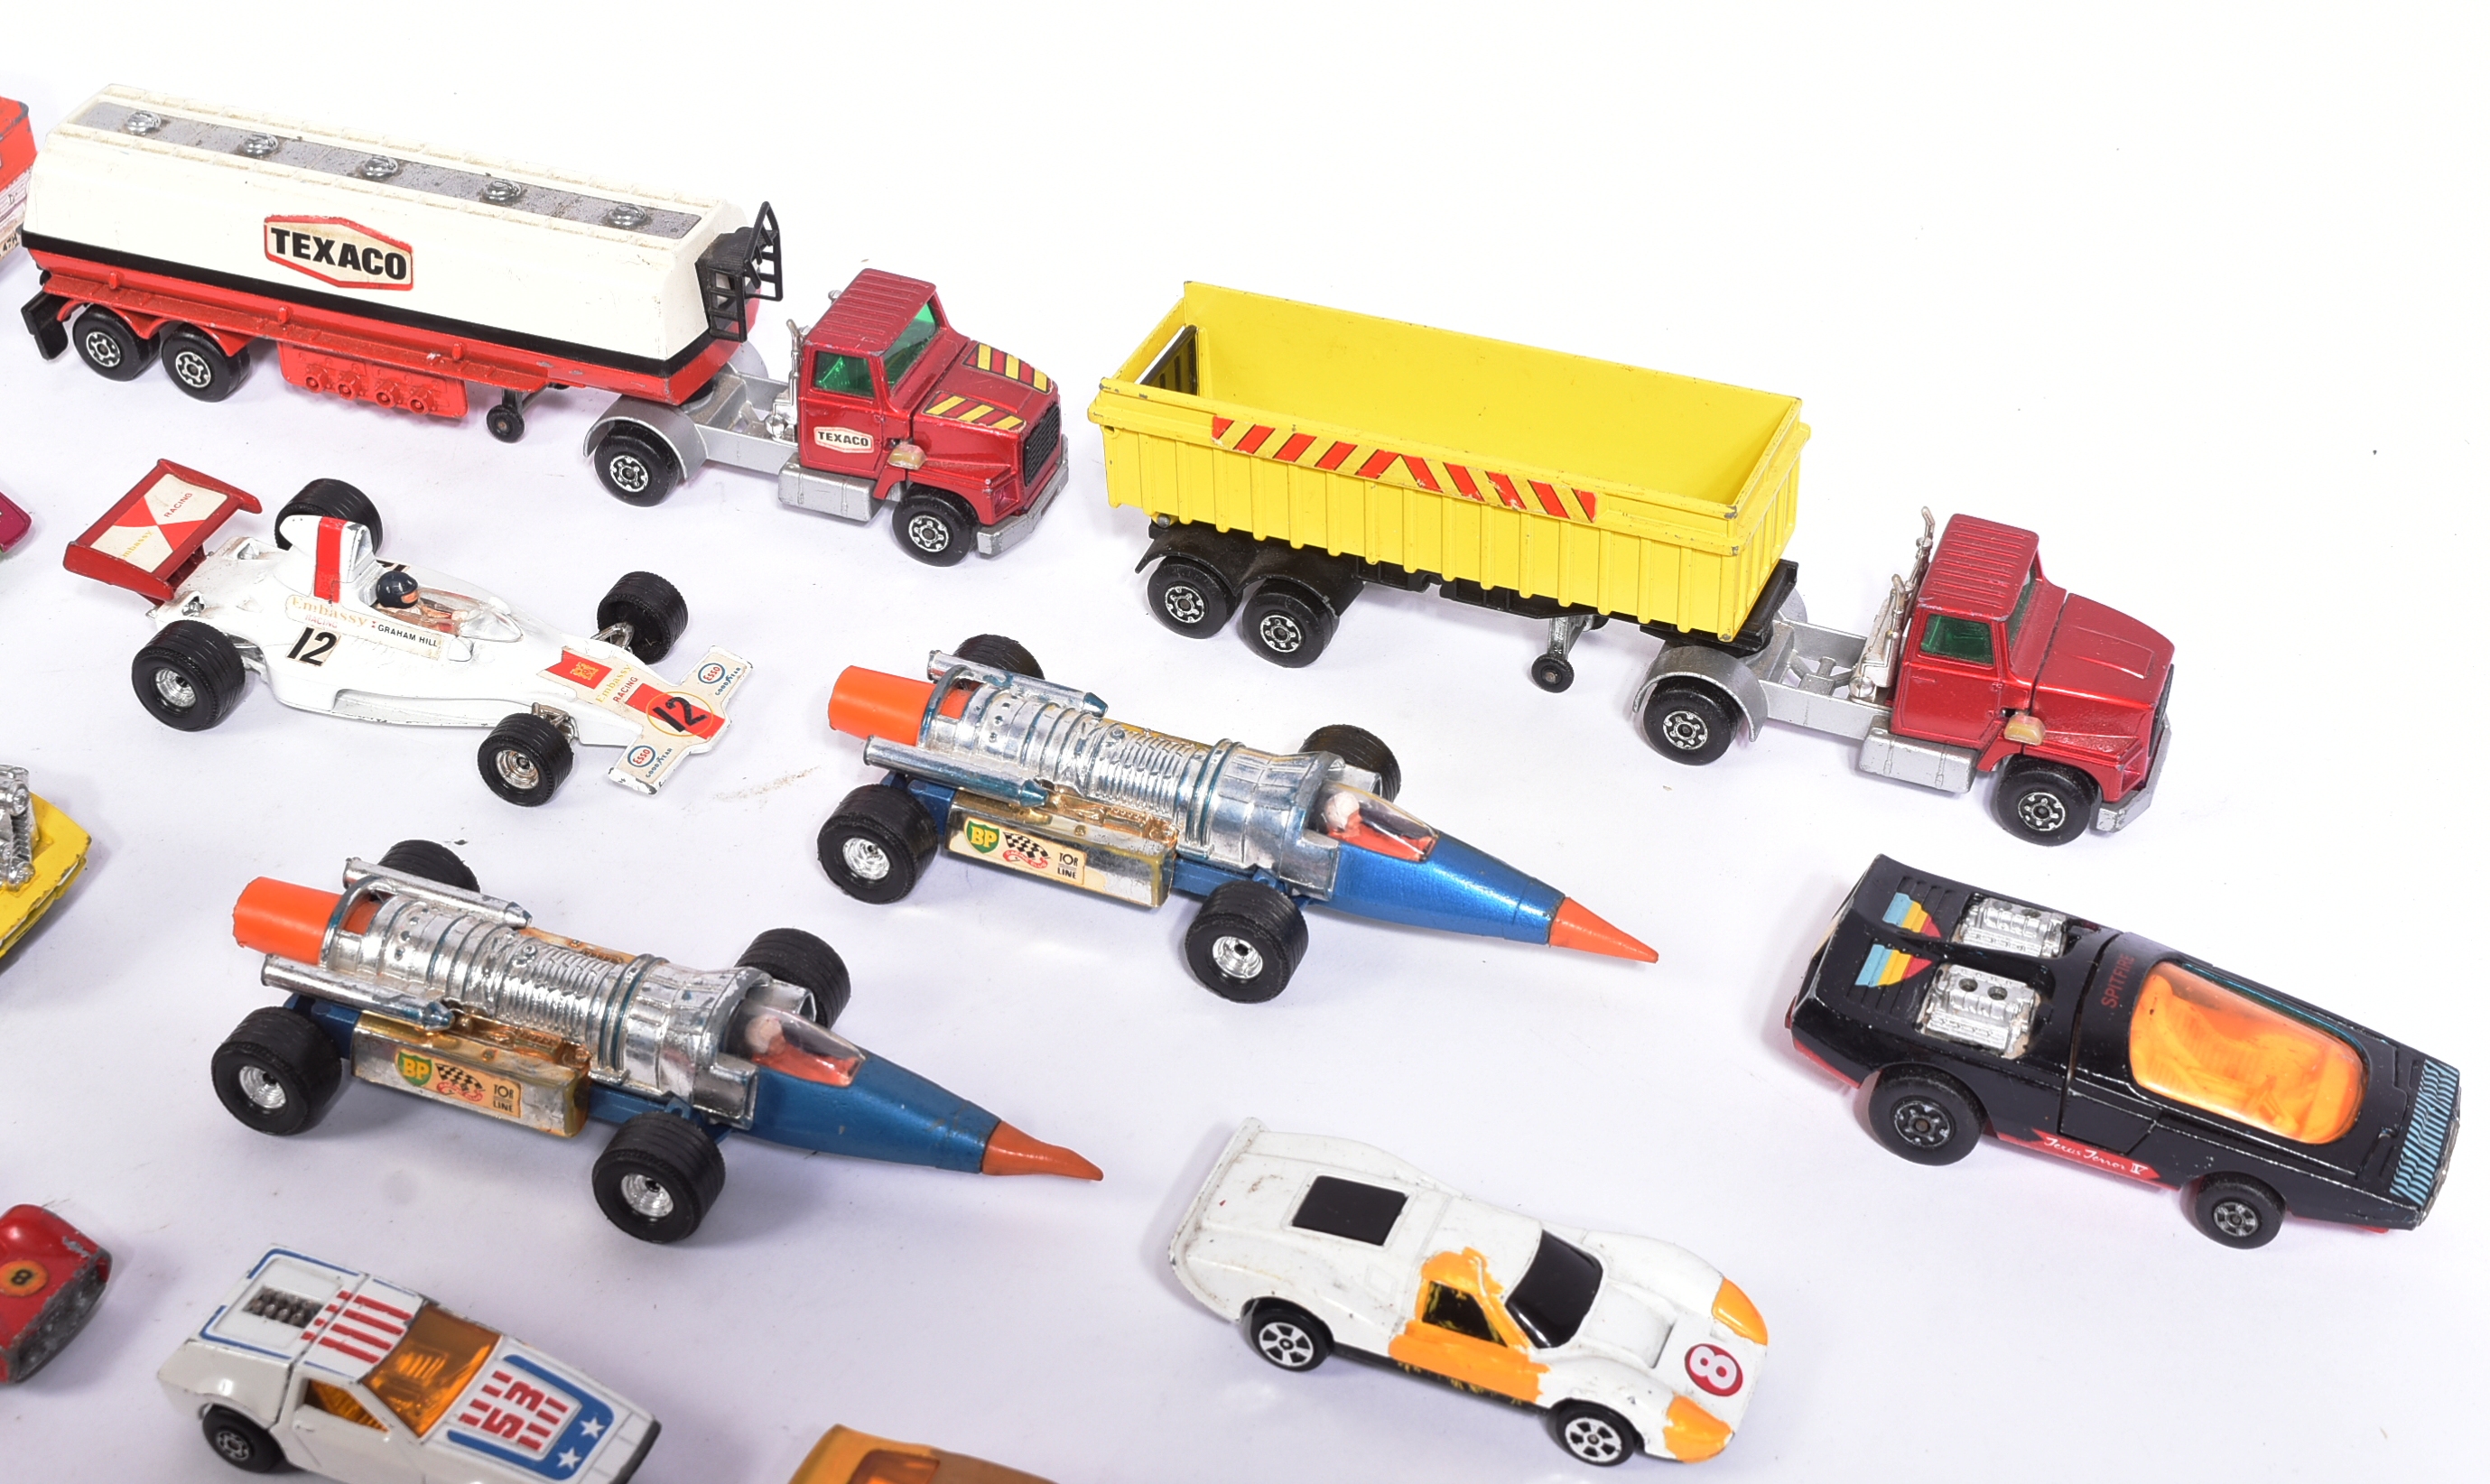 DIECAST - COLLECTION OF VINTAGE DIECAST MODELS - Image 3 of 6